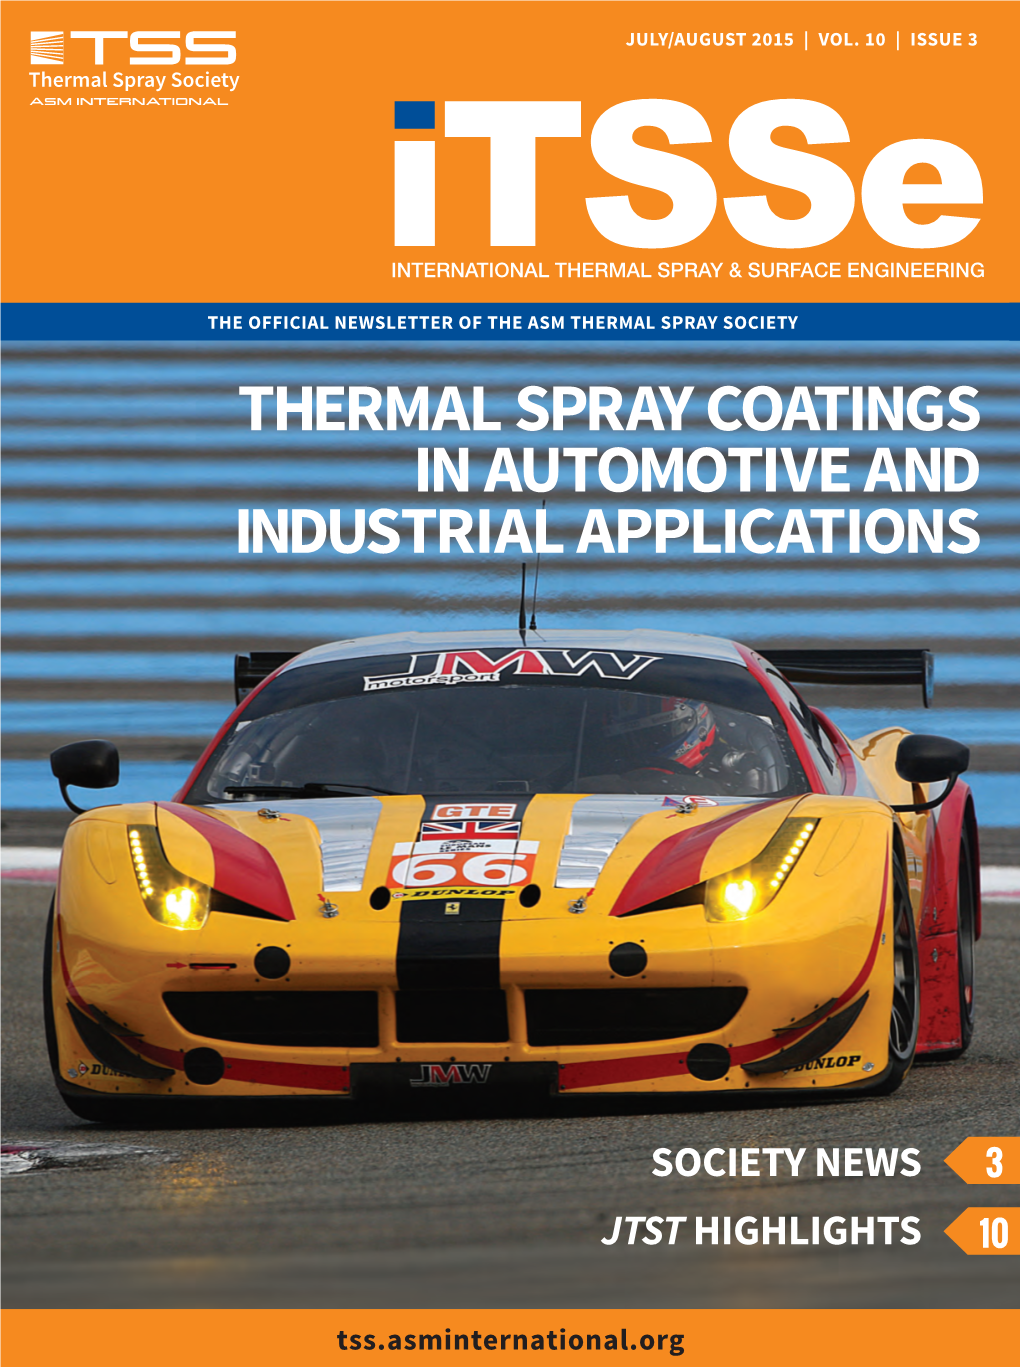 Advanced Processes and Applications for Thermal